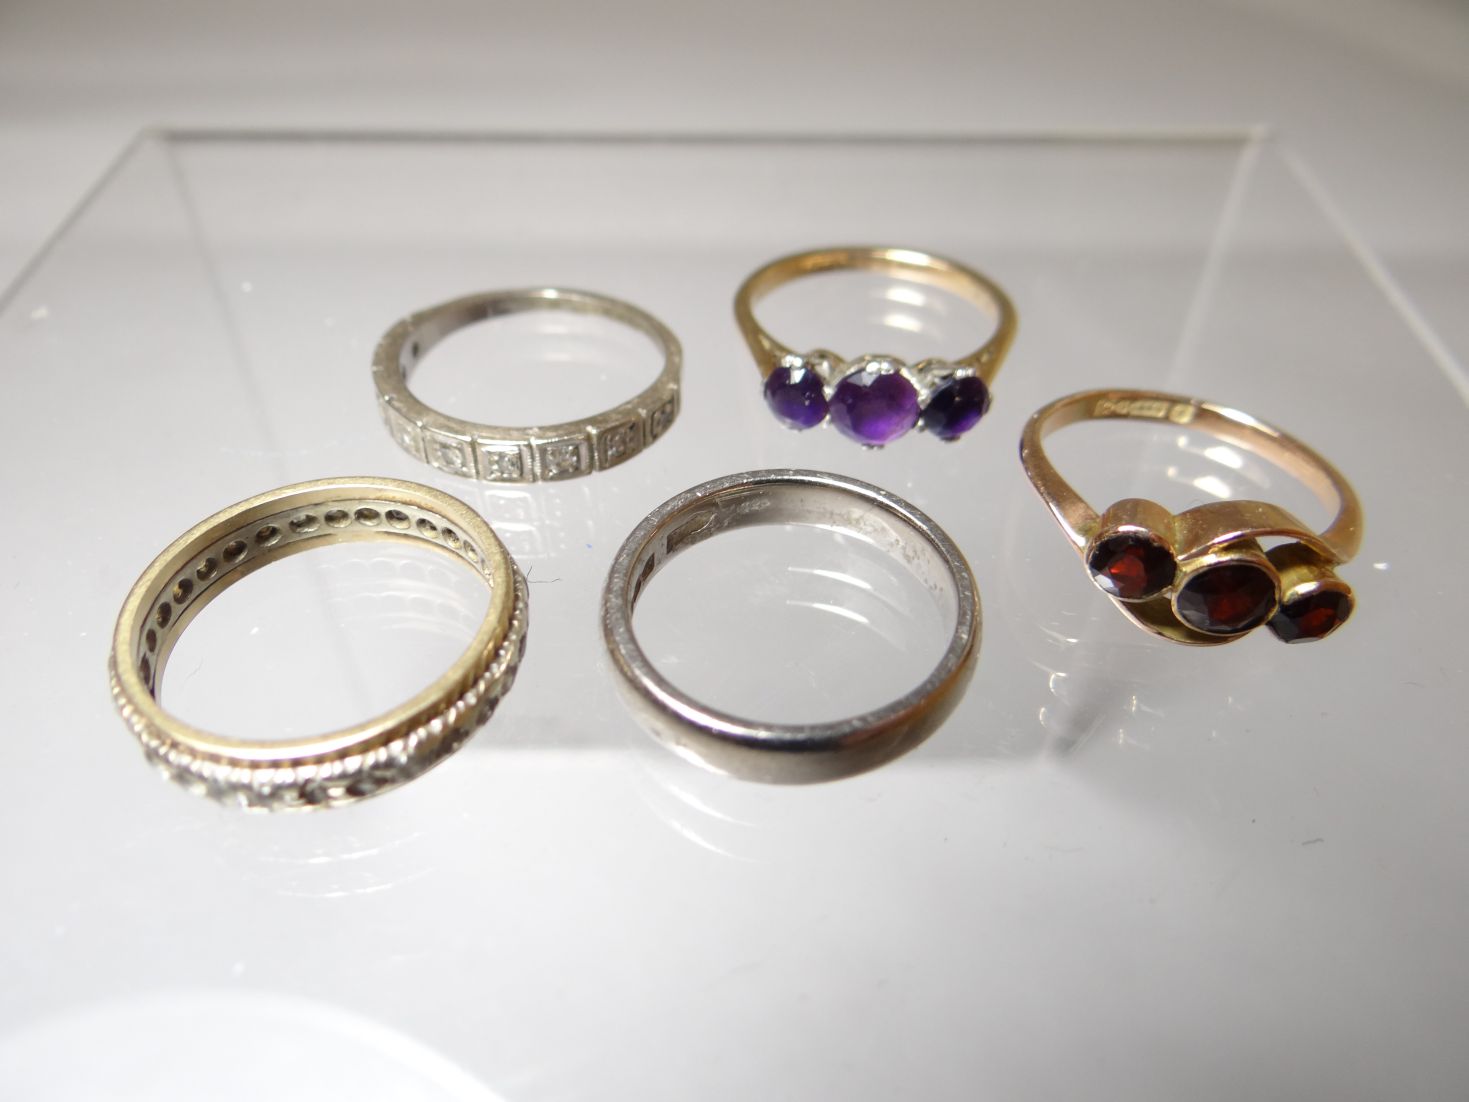 Five mixed rings - three marked as 9ct, a believed to be white gold band ring (mark unclear) and